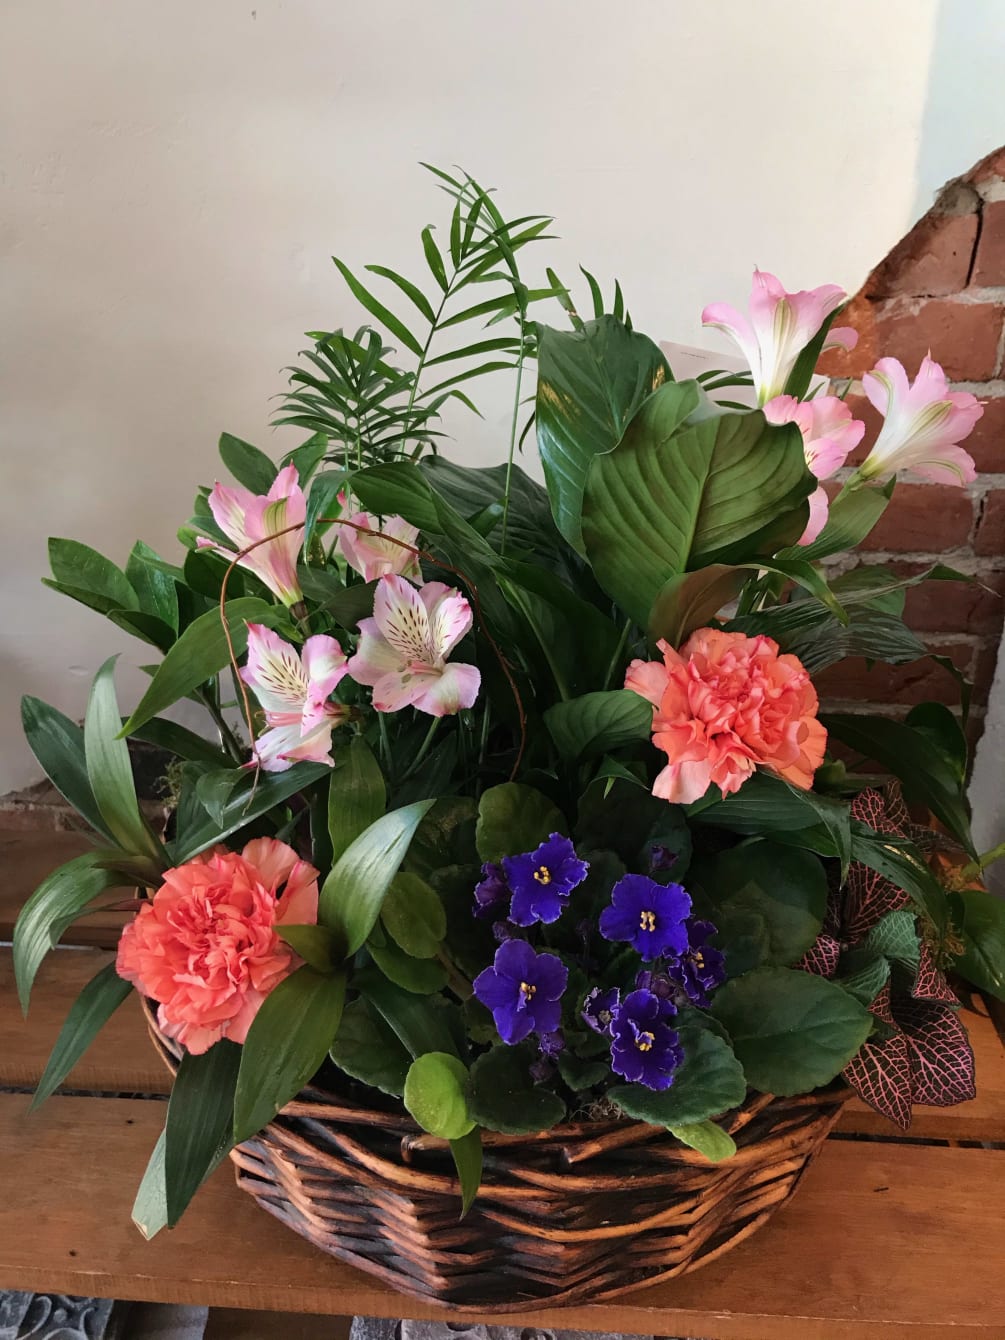 A beautiful mix of 6 tropical plants with fresh flowers added, looks